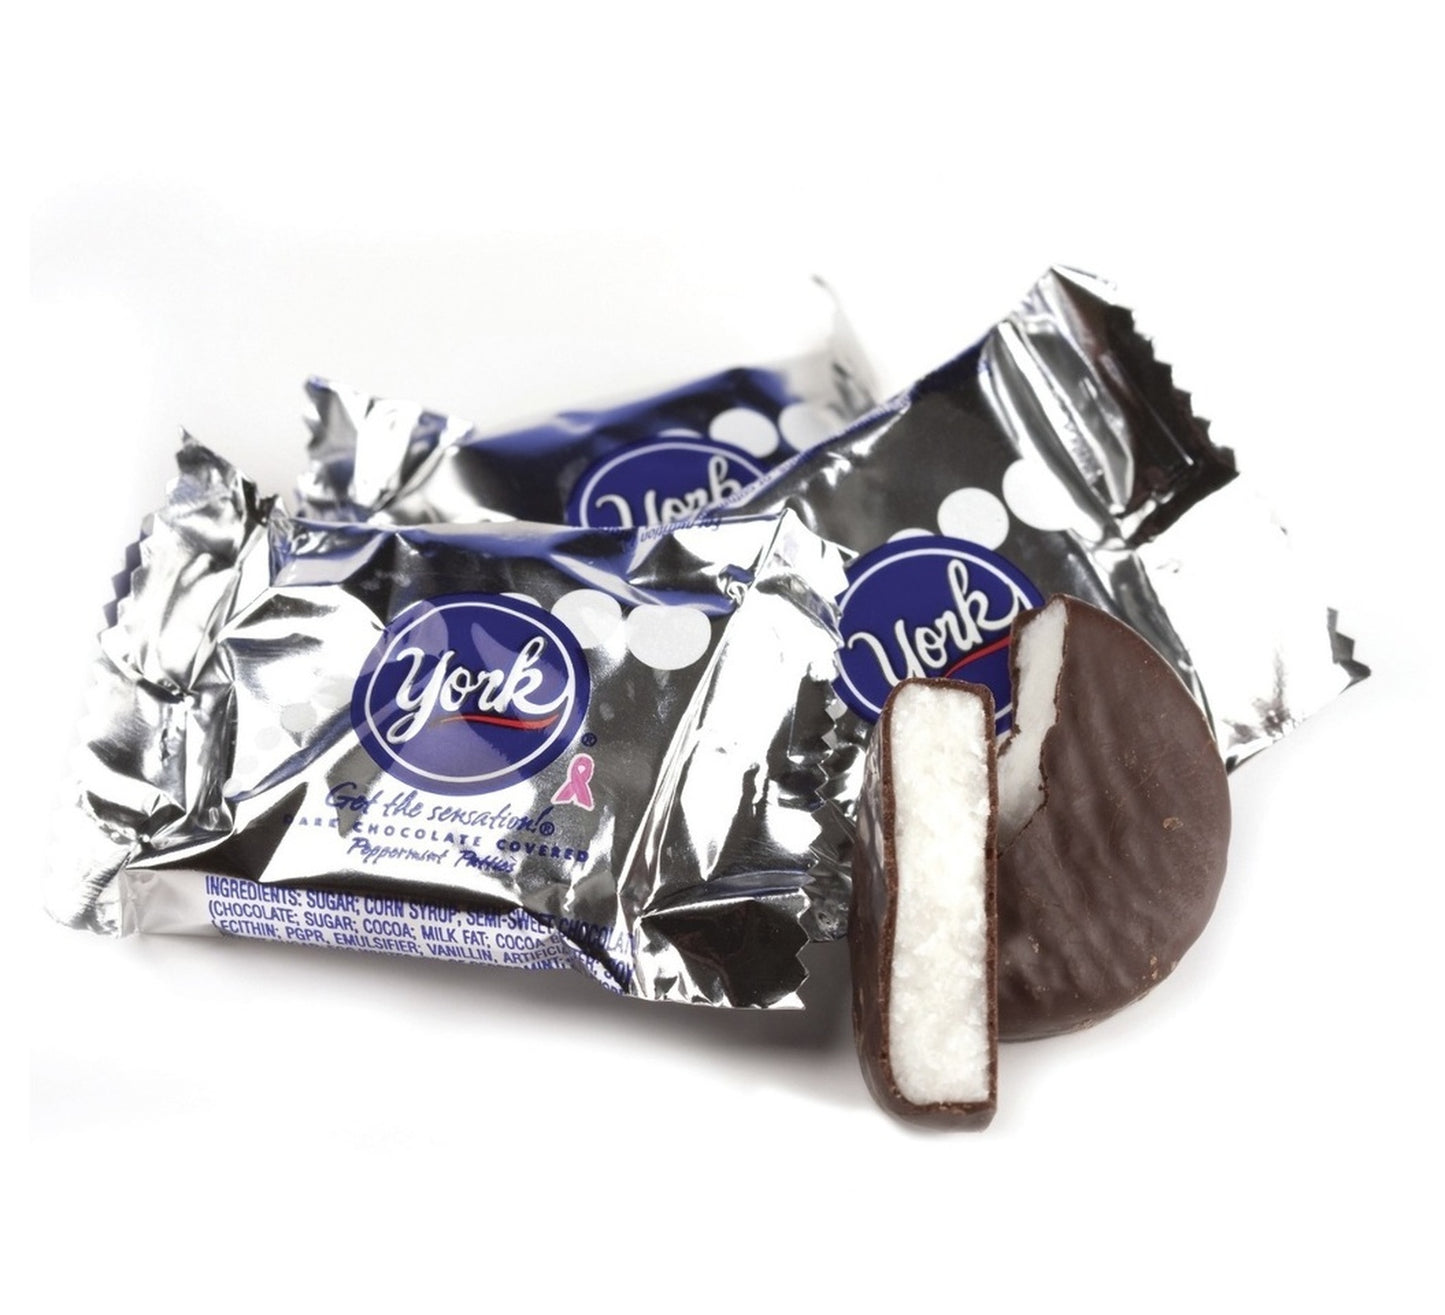 York Peppermint Patties - 8 Individually Wrapped Mini Patties for $4.00